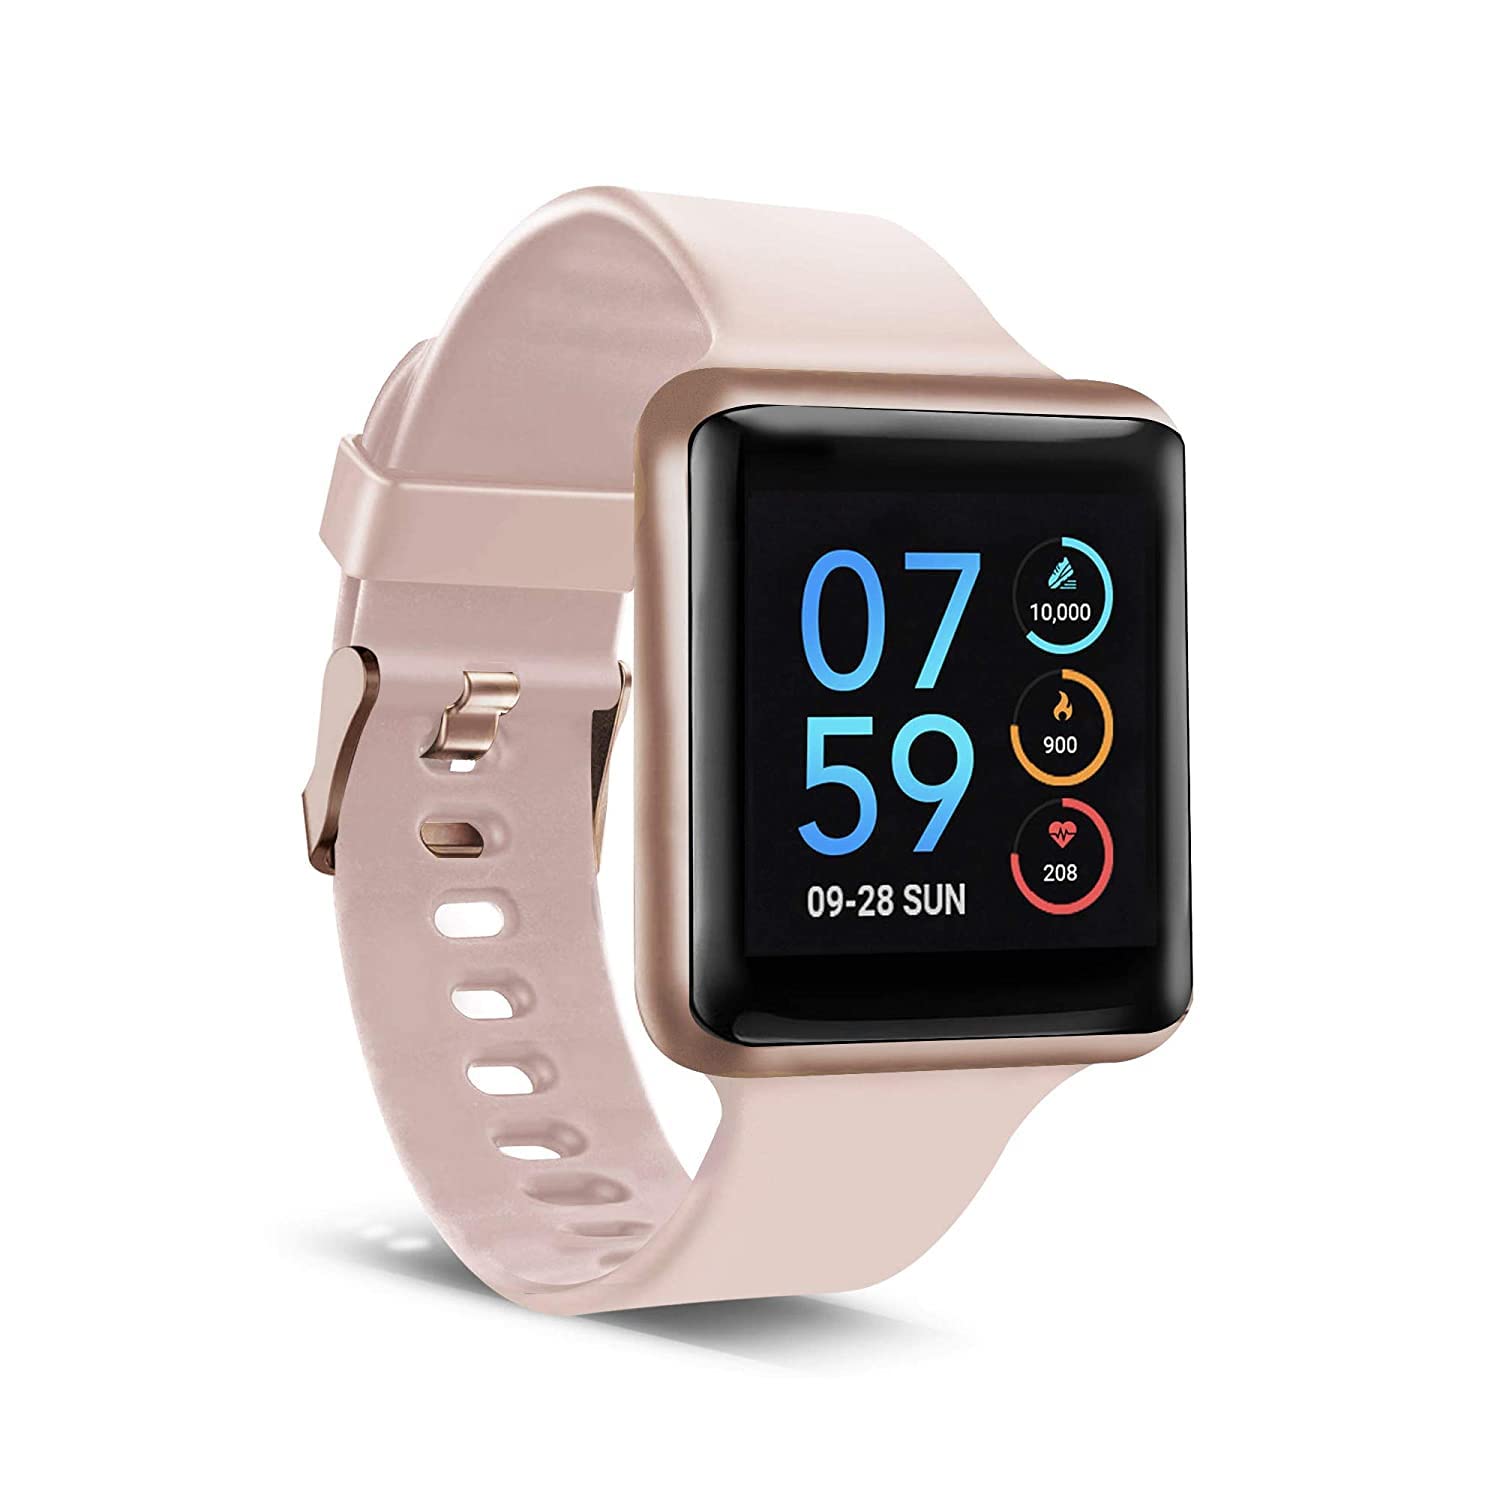 iTouch Air Special Edition Smartwatch, Heart Rate Monitor, Pedometer, Walking and Running Tracker for Women and Men, Android & iOS Compatible - Solid Strap (Blush/Rose Gold)